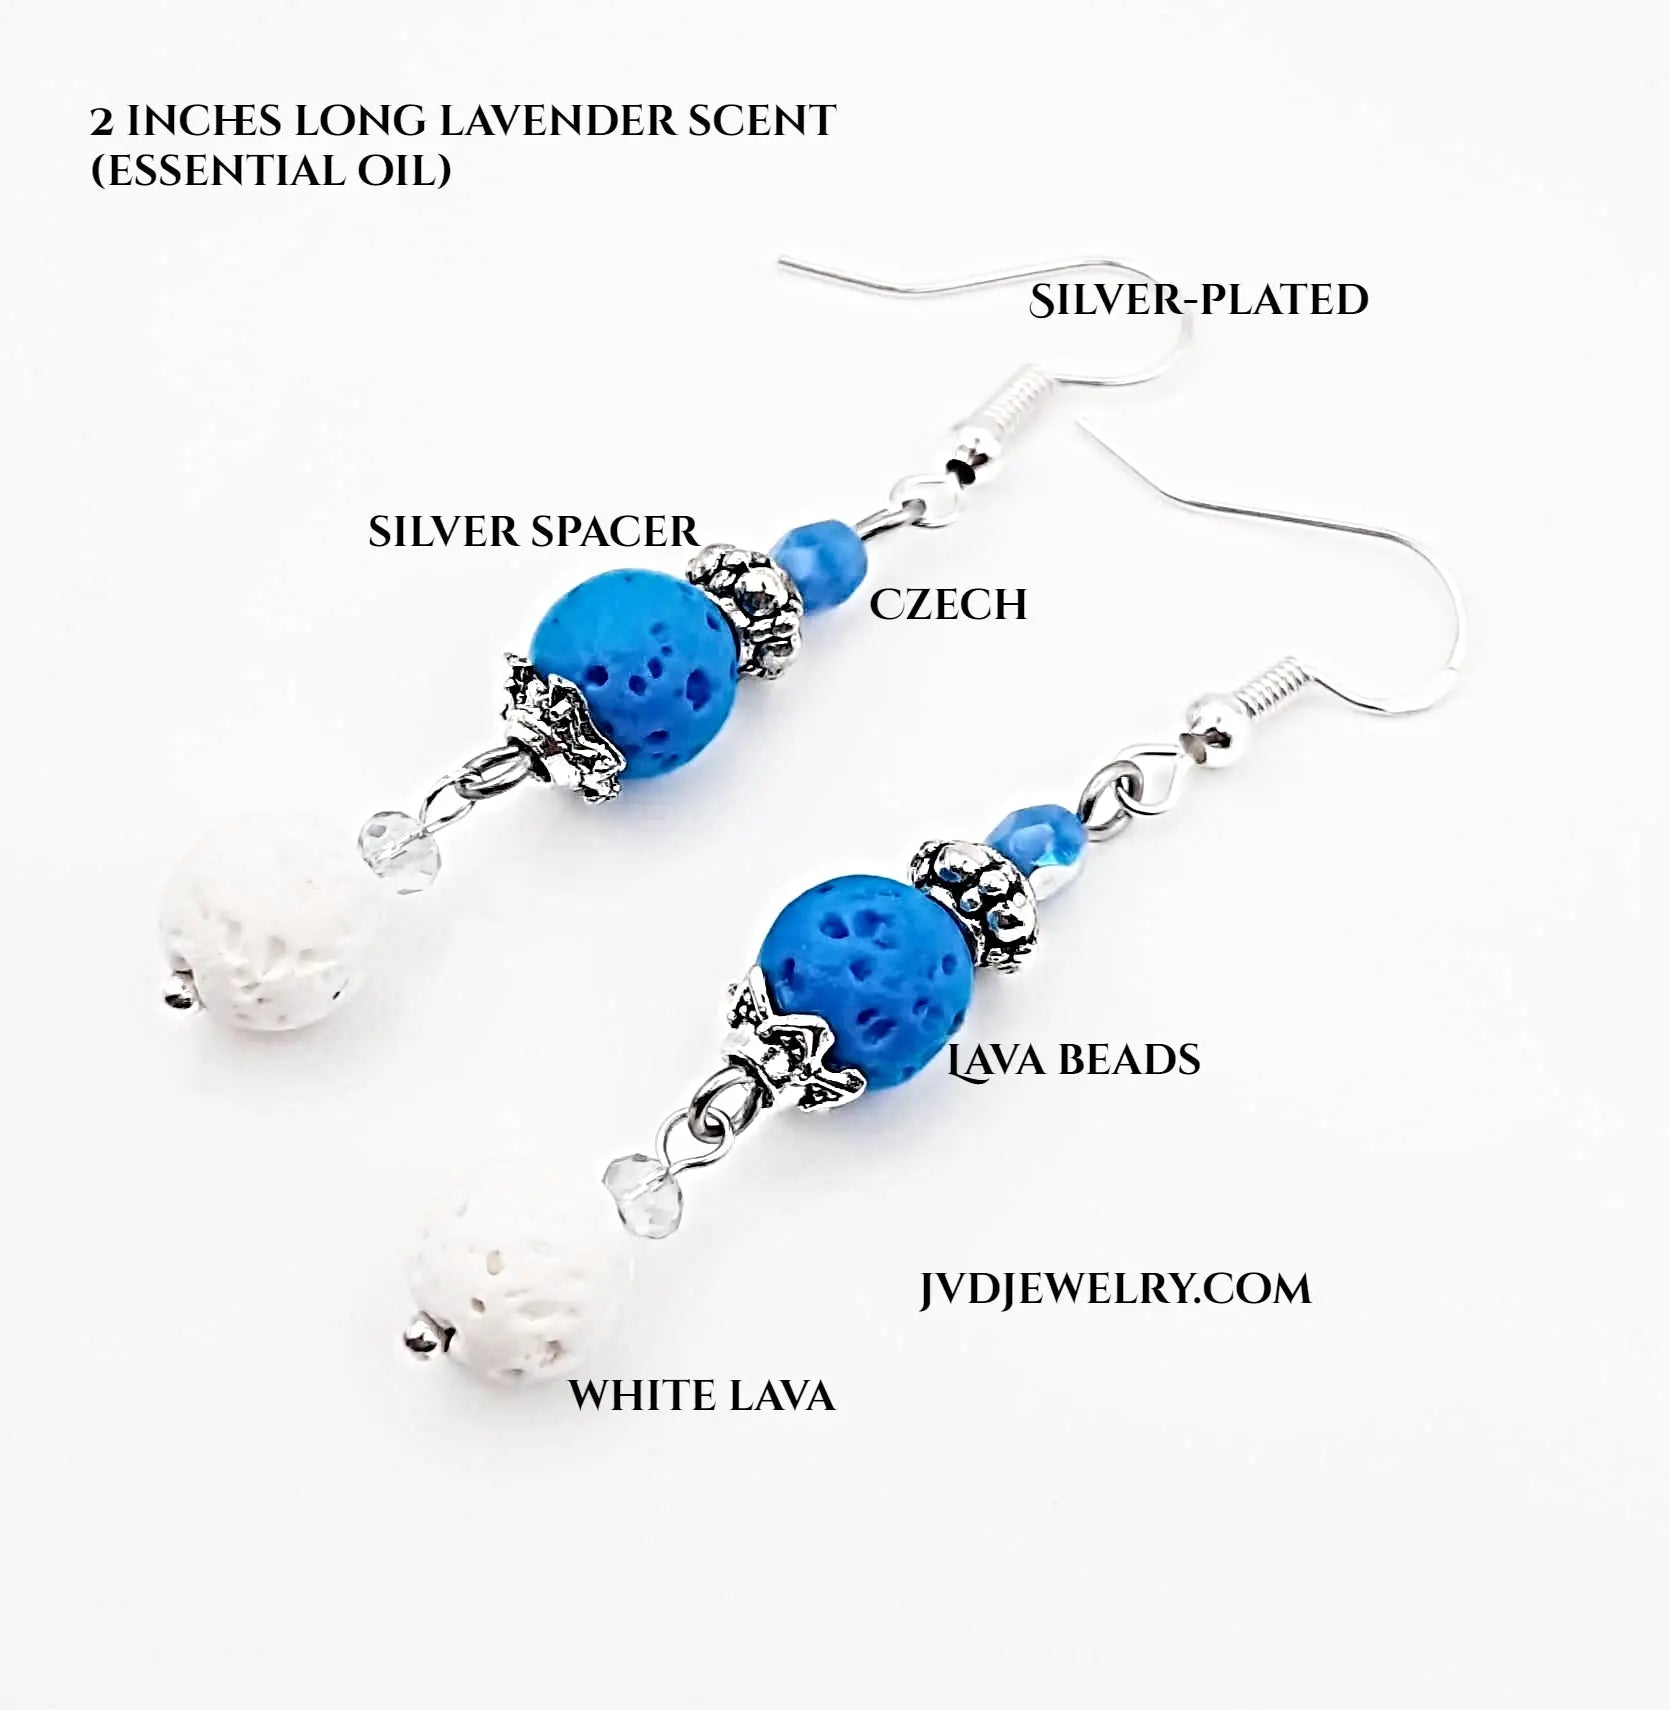 Blue and white lava beads with Lavender scent from essential oil earrings - Image #2